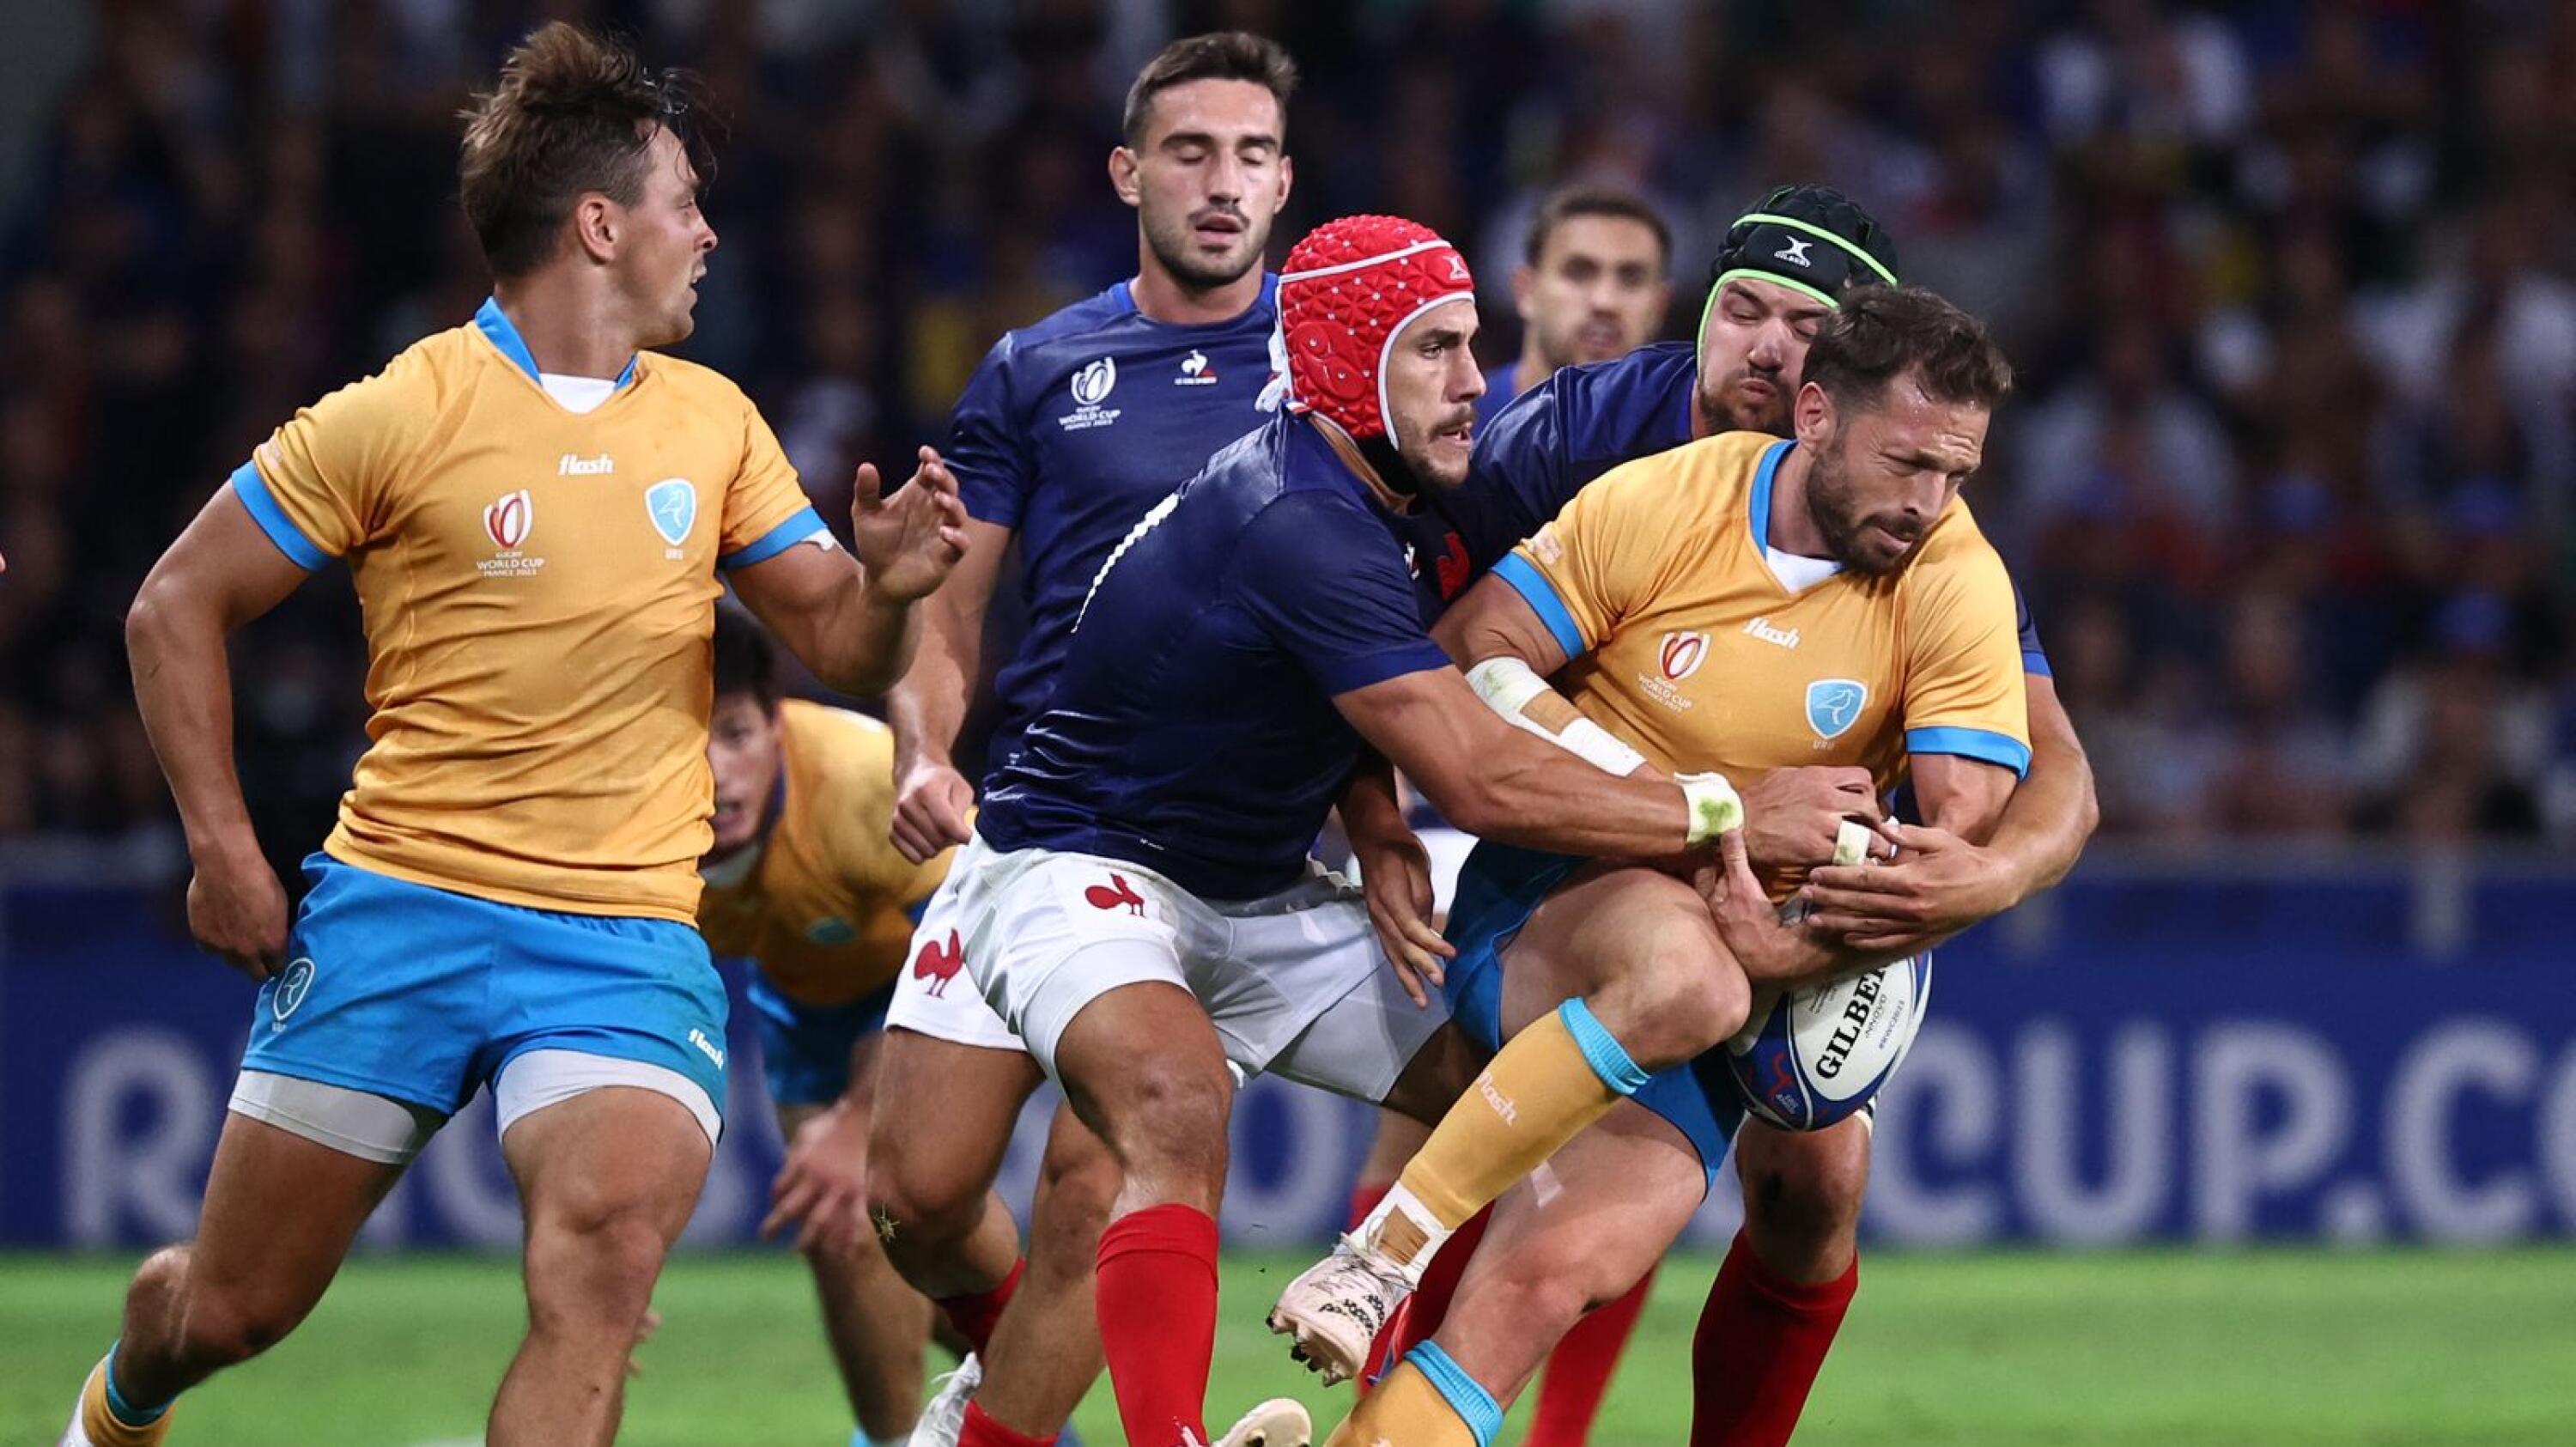 Uruguay's fly-half Felipe Berchesi is tackled by France's wing Gabin Villiere during their Rugby World Cup Pool A match against France at Pierre-Mauroy stadium in Lille